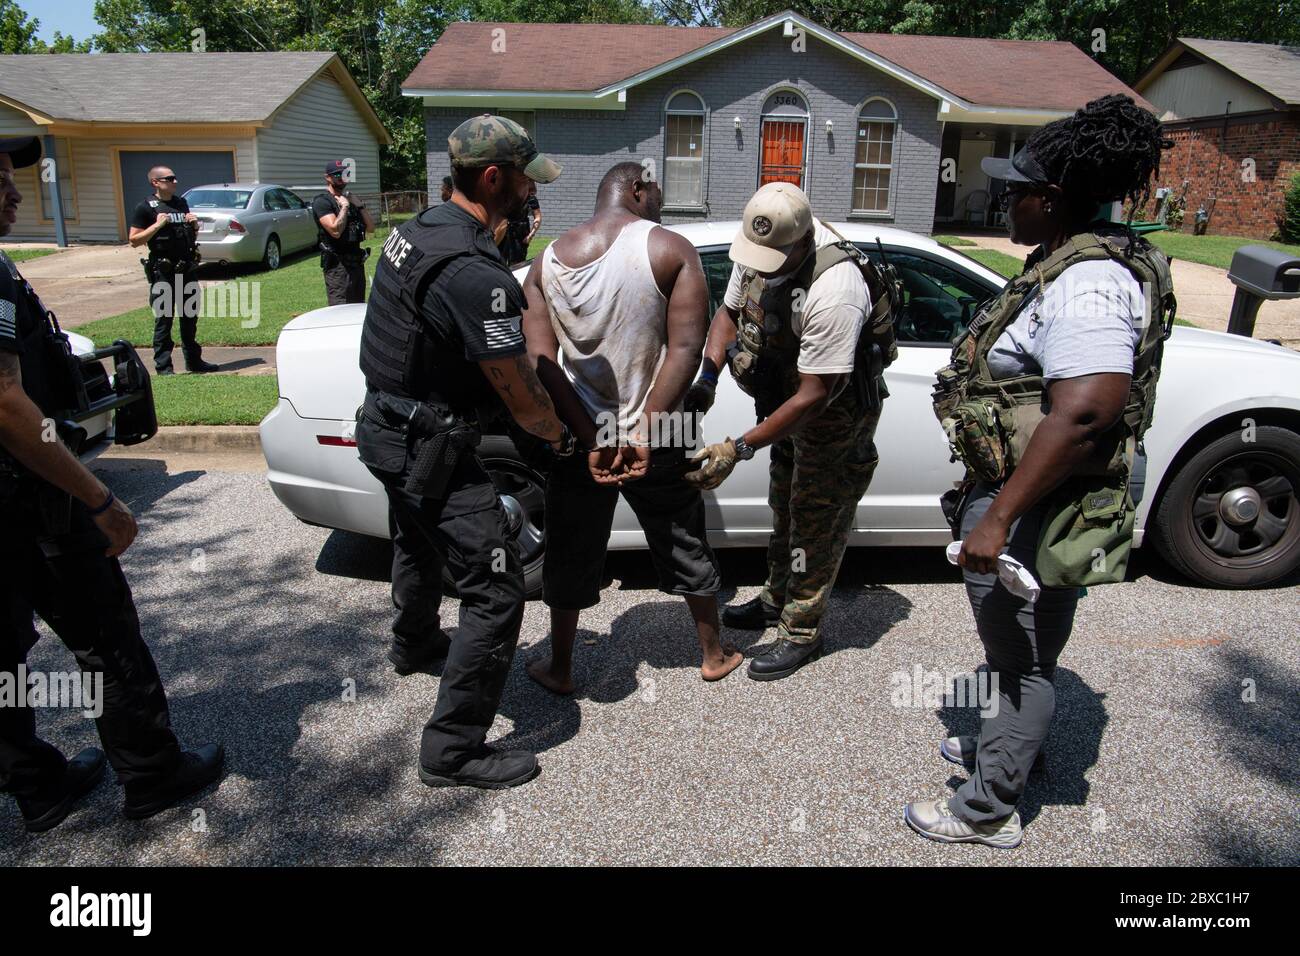 U.S. Marshals and Memphis Police arrest suspects wanted for violent offenses during the two-week long Operation Bluff City Blues August 12, 2019 in Memphis, Tennessee. The initiative resulted in the arrests of 214 individuals in West Tennessee. Stock Photo